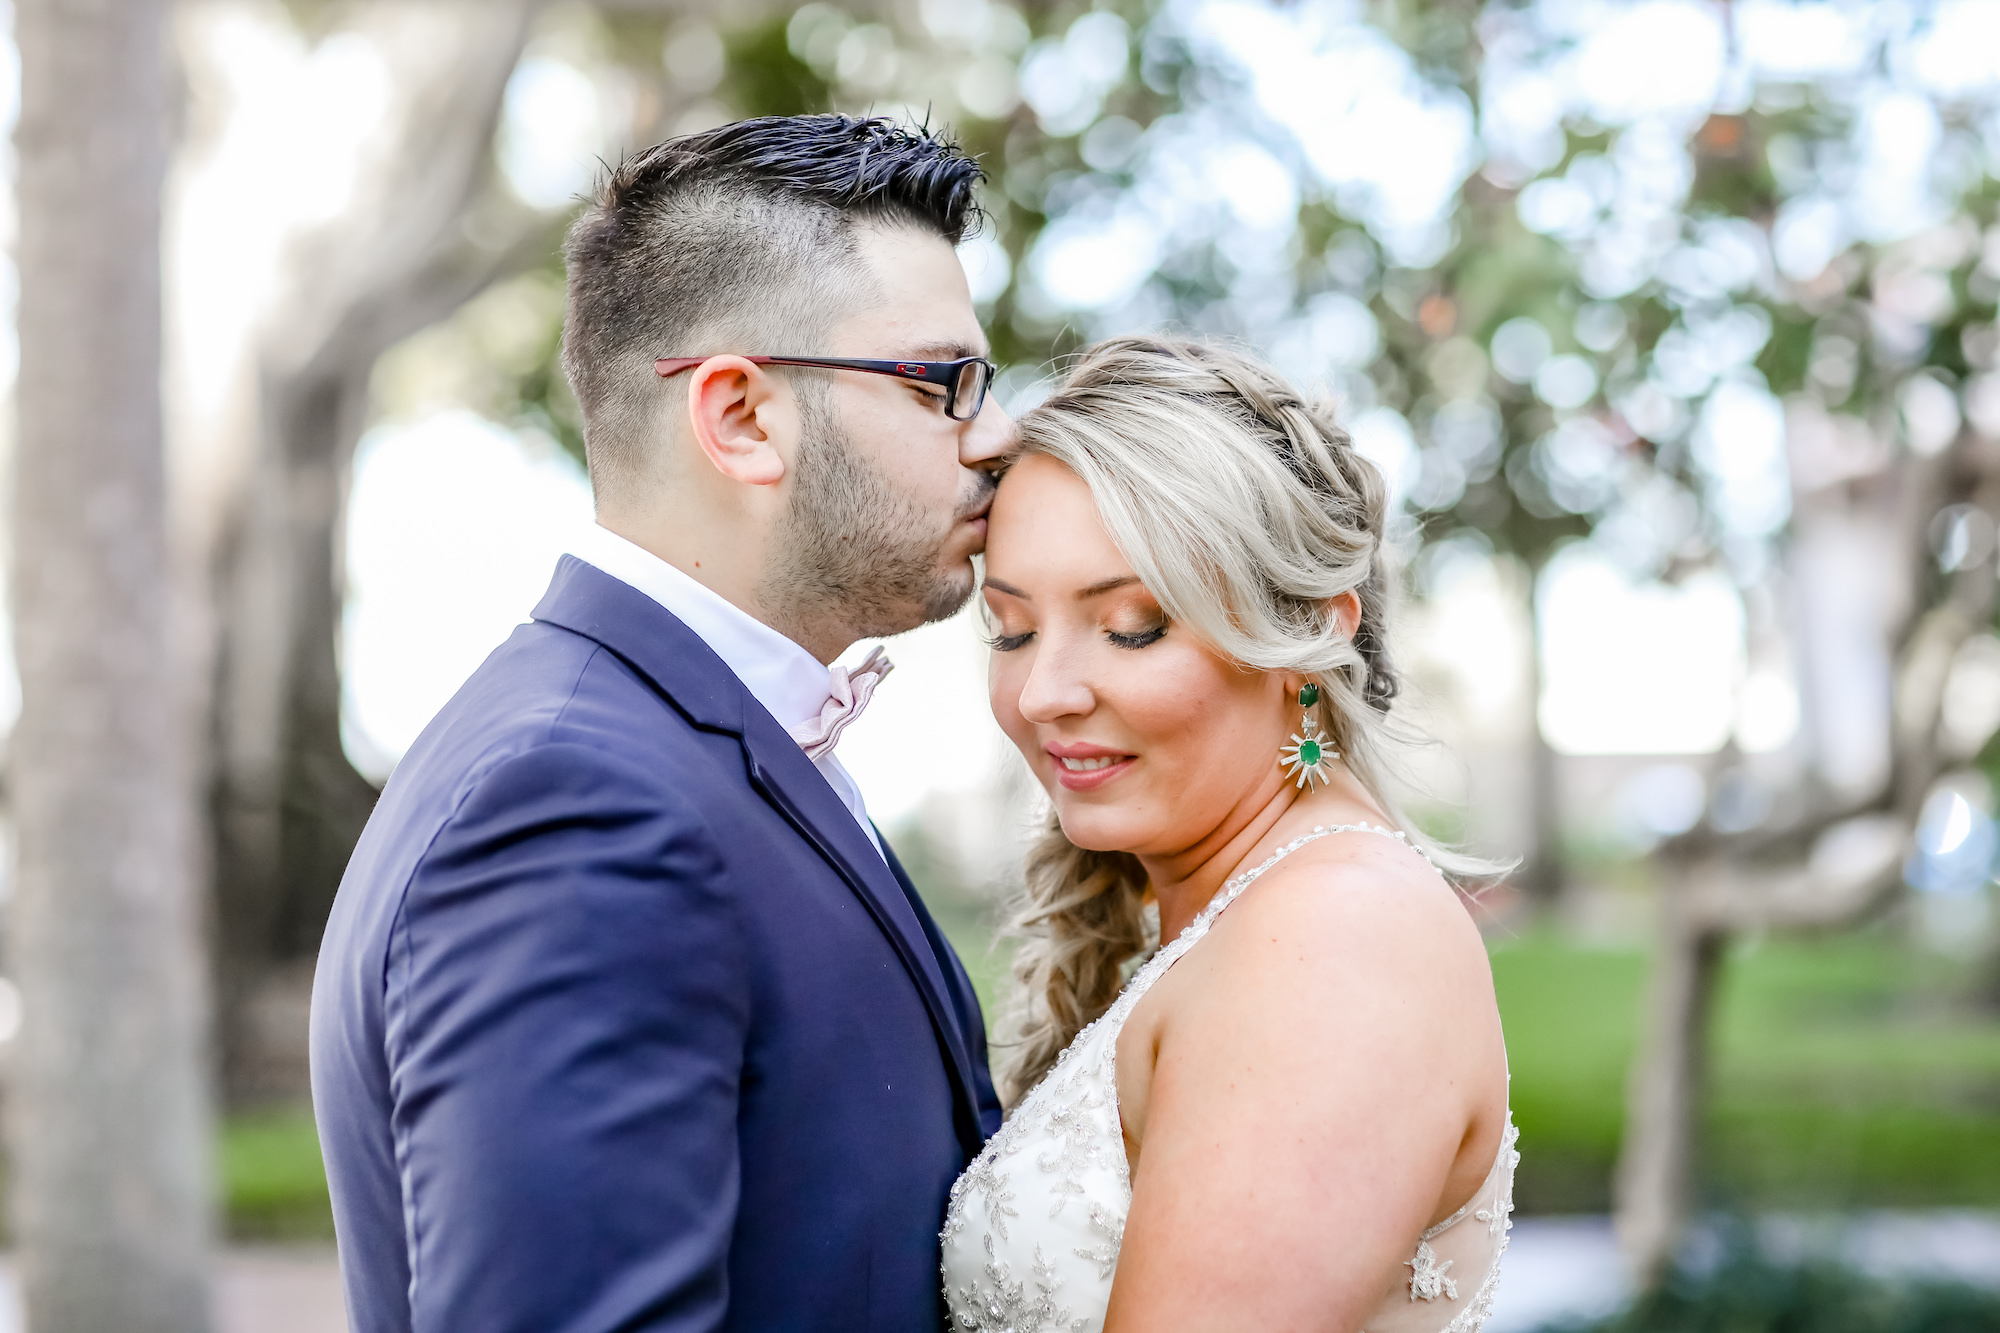 St. Petersburg Bride and Groom Wedding Portrait. Groom in Navy Suite with Dusty Rose, Blush Pink Bowtie, Bride Wearing Statement Green Emerald Earrings | Florida Wedding Photographer Lifelong Photography Studios